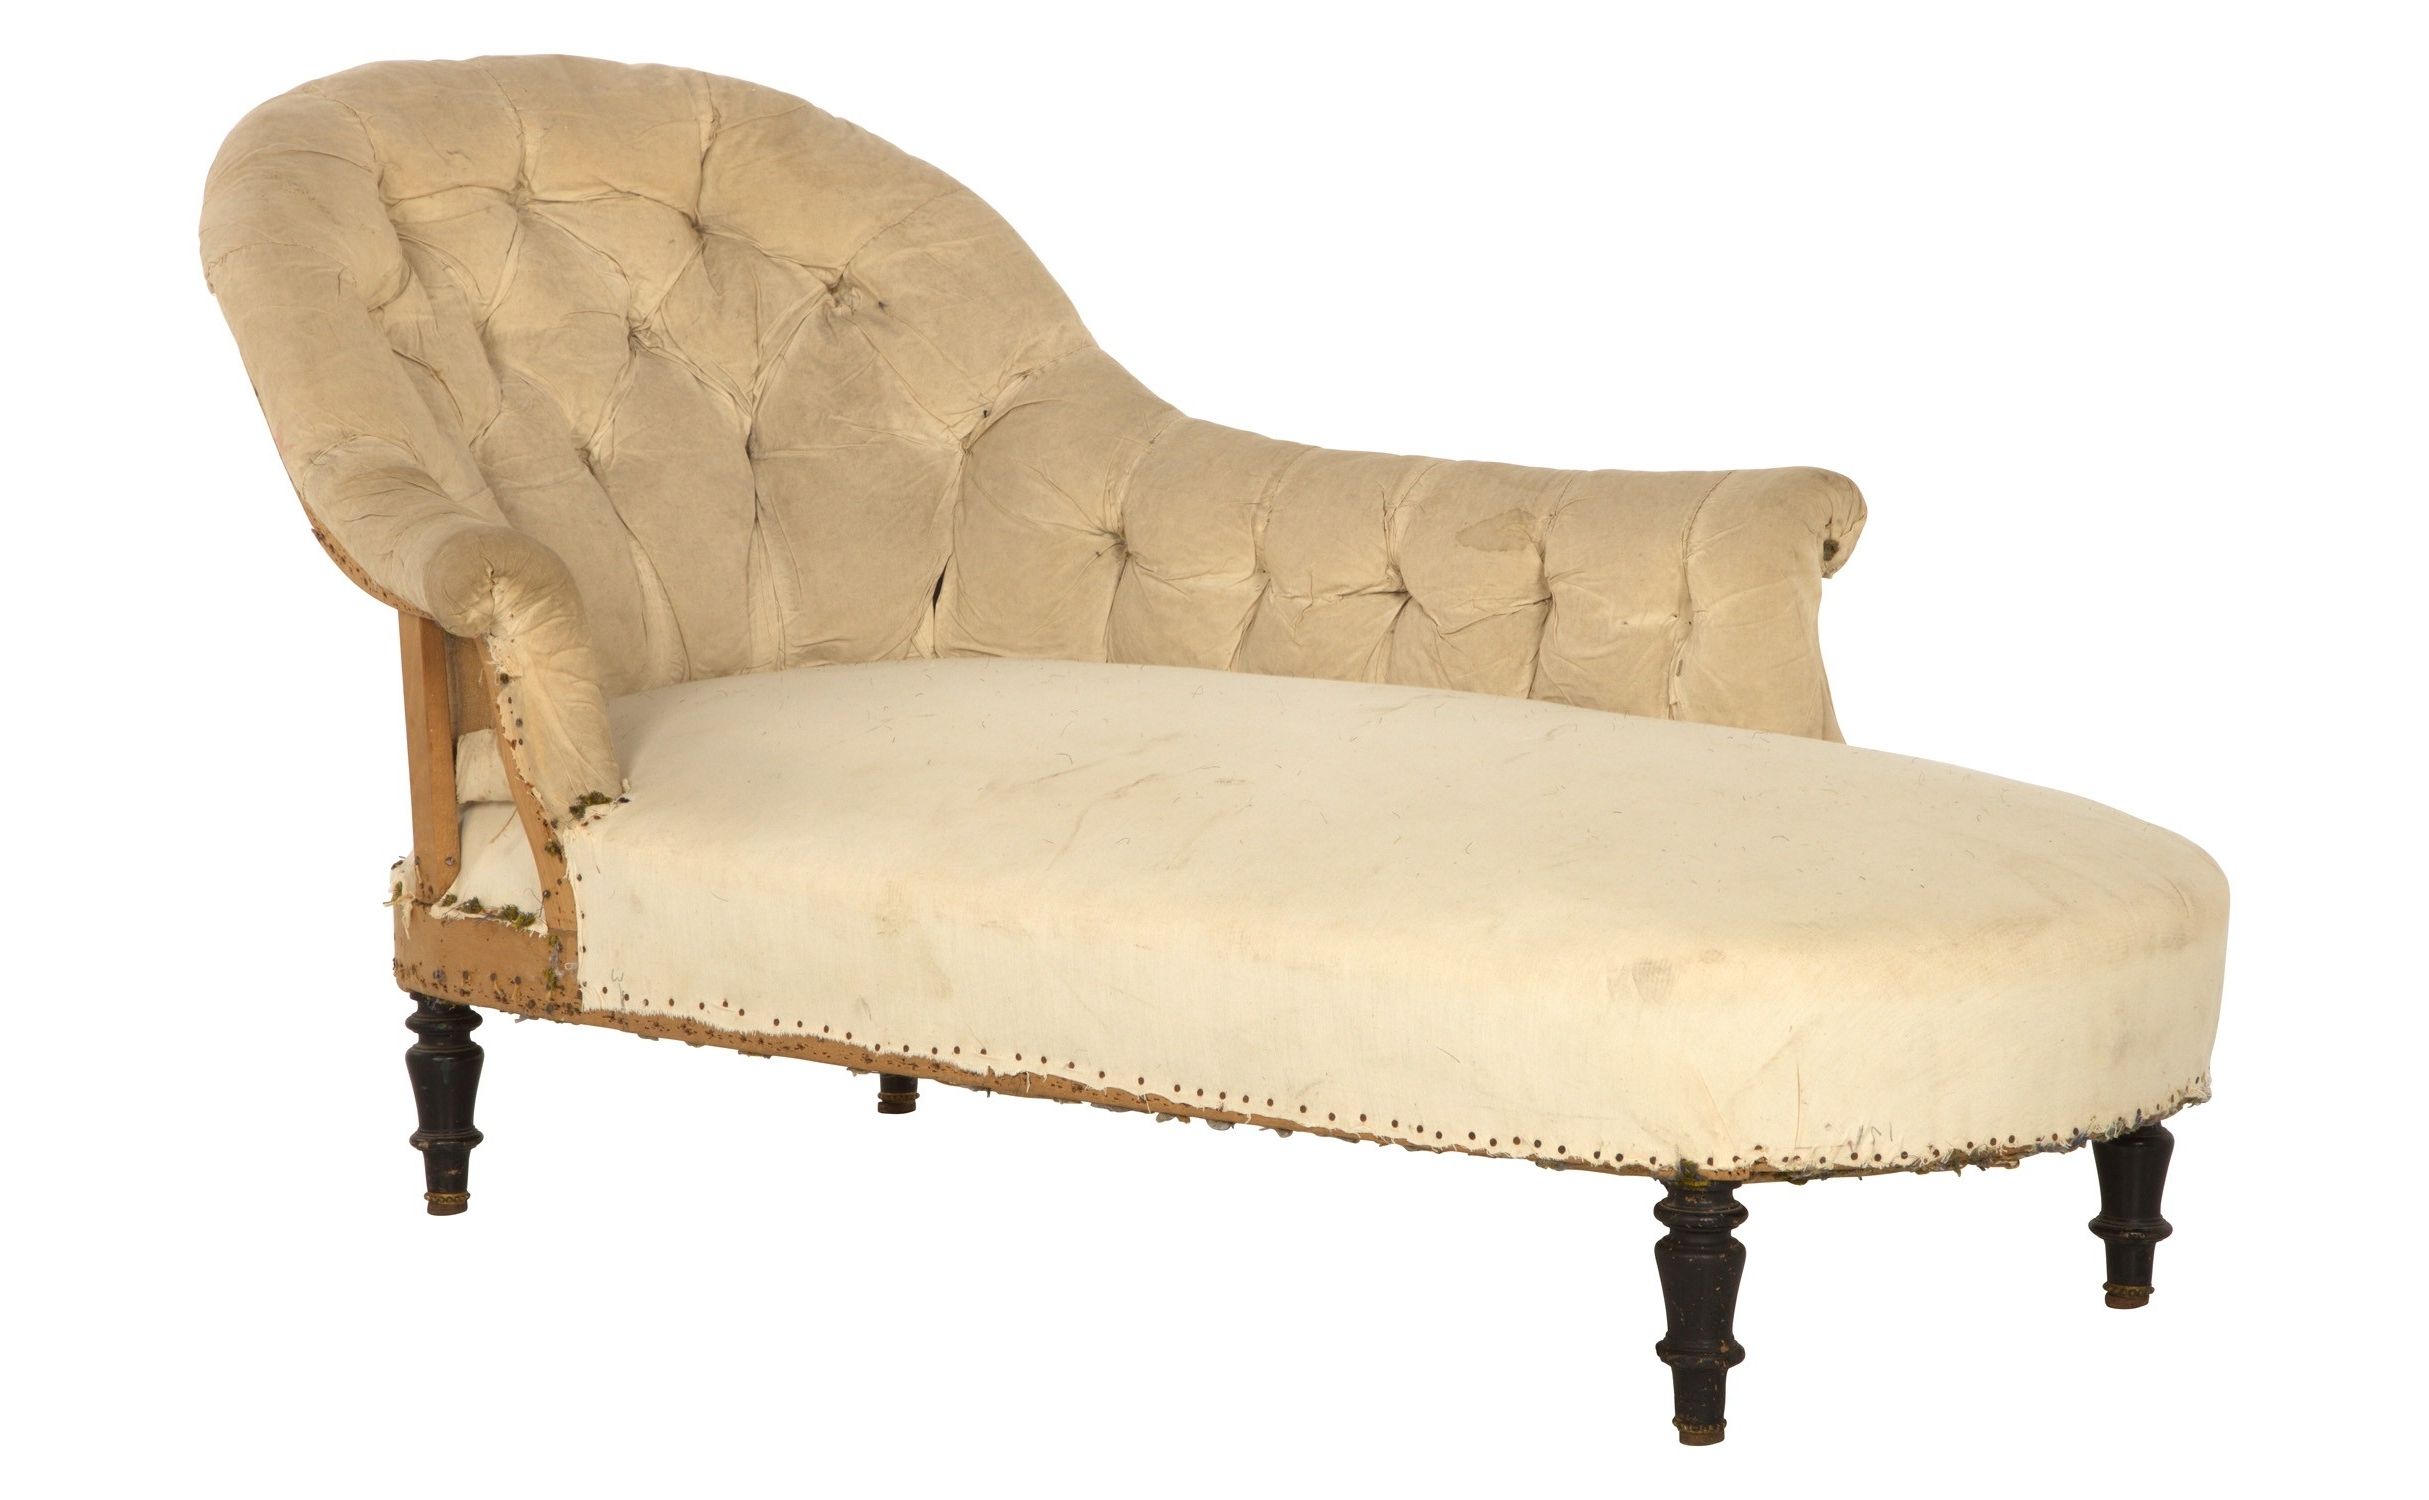 Vintage Chaise Lounges With Regard To Favorite Antique Unupholstered Chaise Lounge (View 1 of 15)